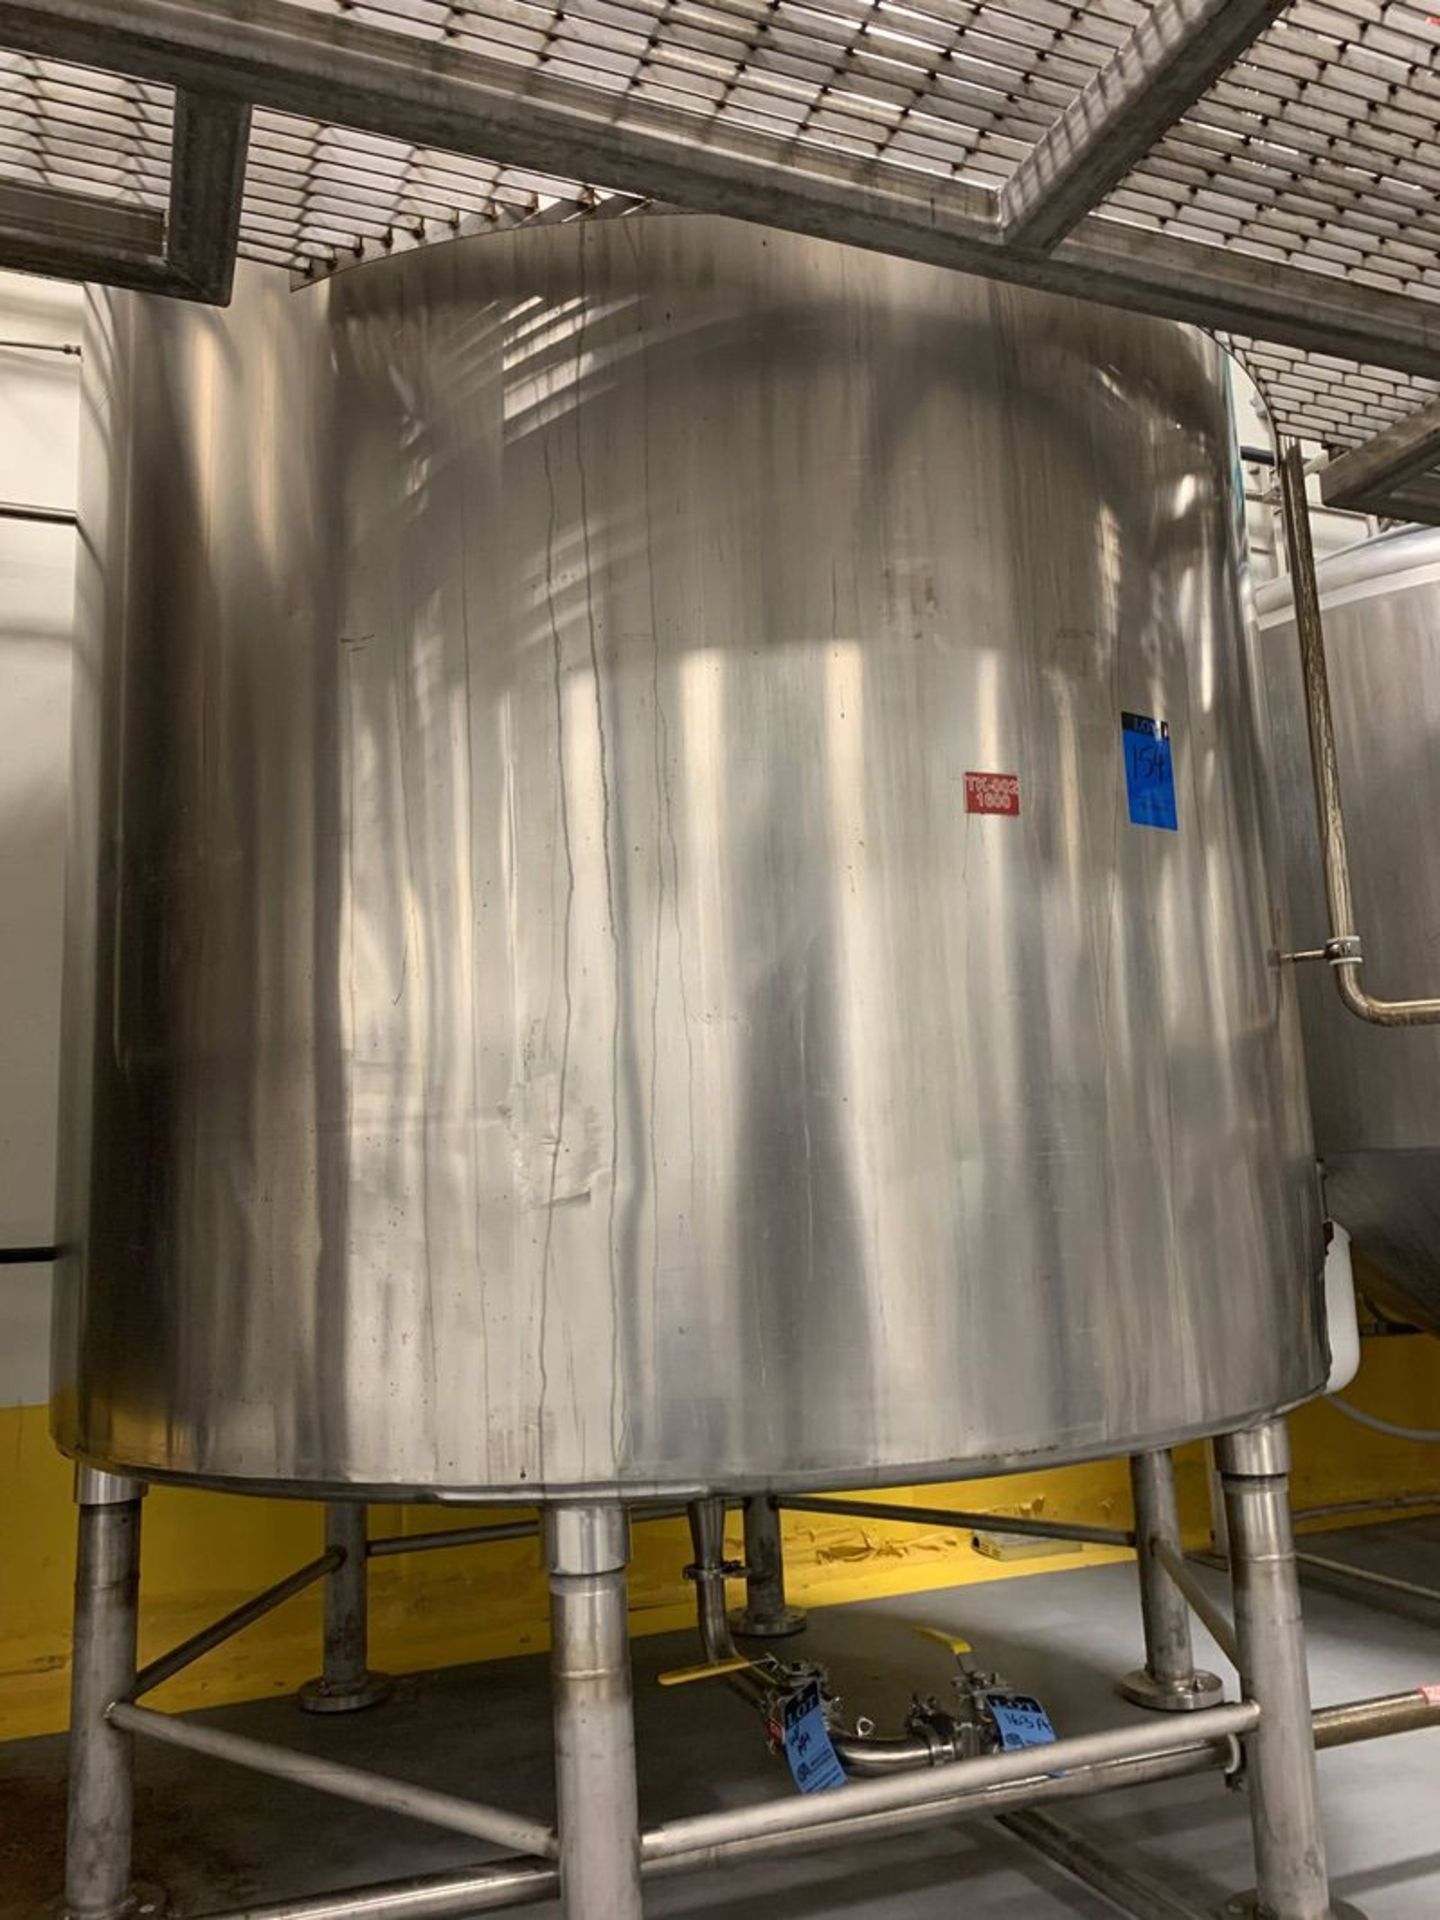 1,600 GALLON STAINLESS STEEL MIX TANK, 80" DIAMETER X 84" HIGH WITH LIGHTNIN MIXER | Rig Fee: $1500 - Image 9 of 10